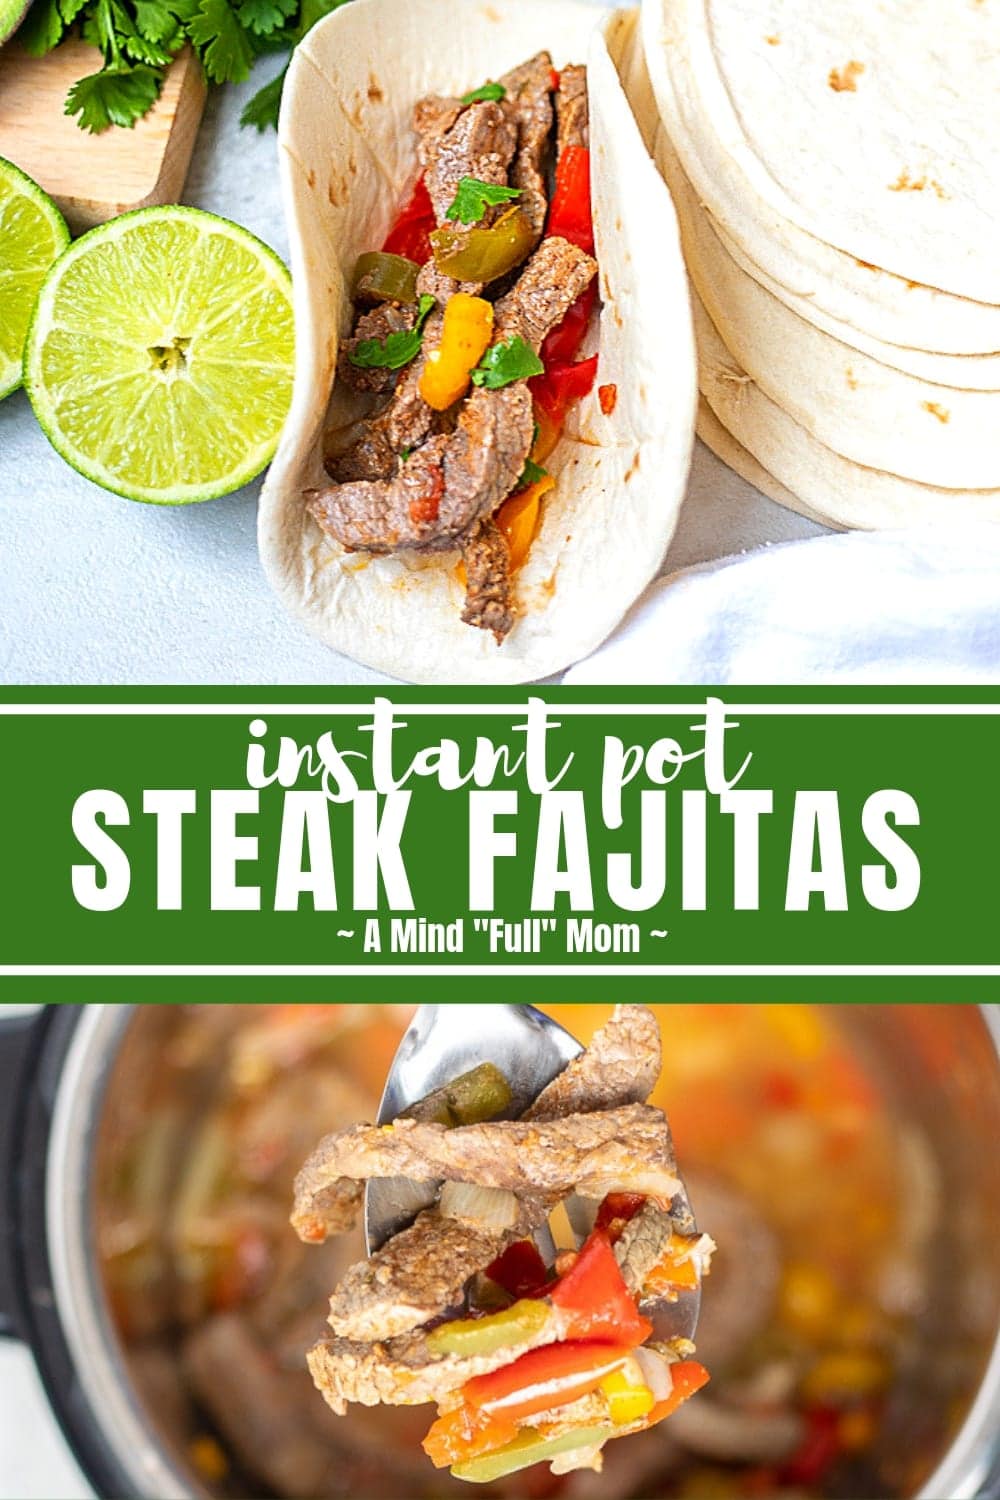 Instant Pot Steak Fajitas are full of flavor and made incredibly easy thanks to the pressure cooker. These flavorful, tender instant pot fajitas are so incredibly easy to make and so delicious they are absolutely irresistible! #instantpot #fajitas #beefrecipe #pressurecooker